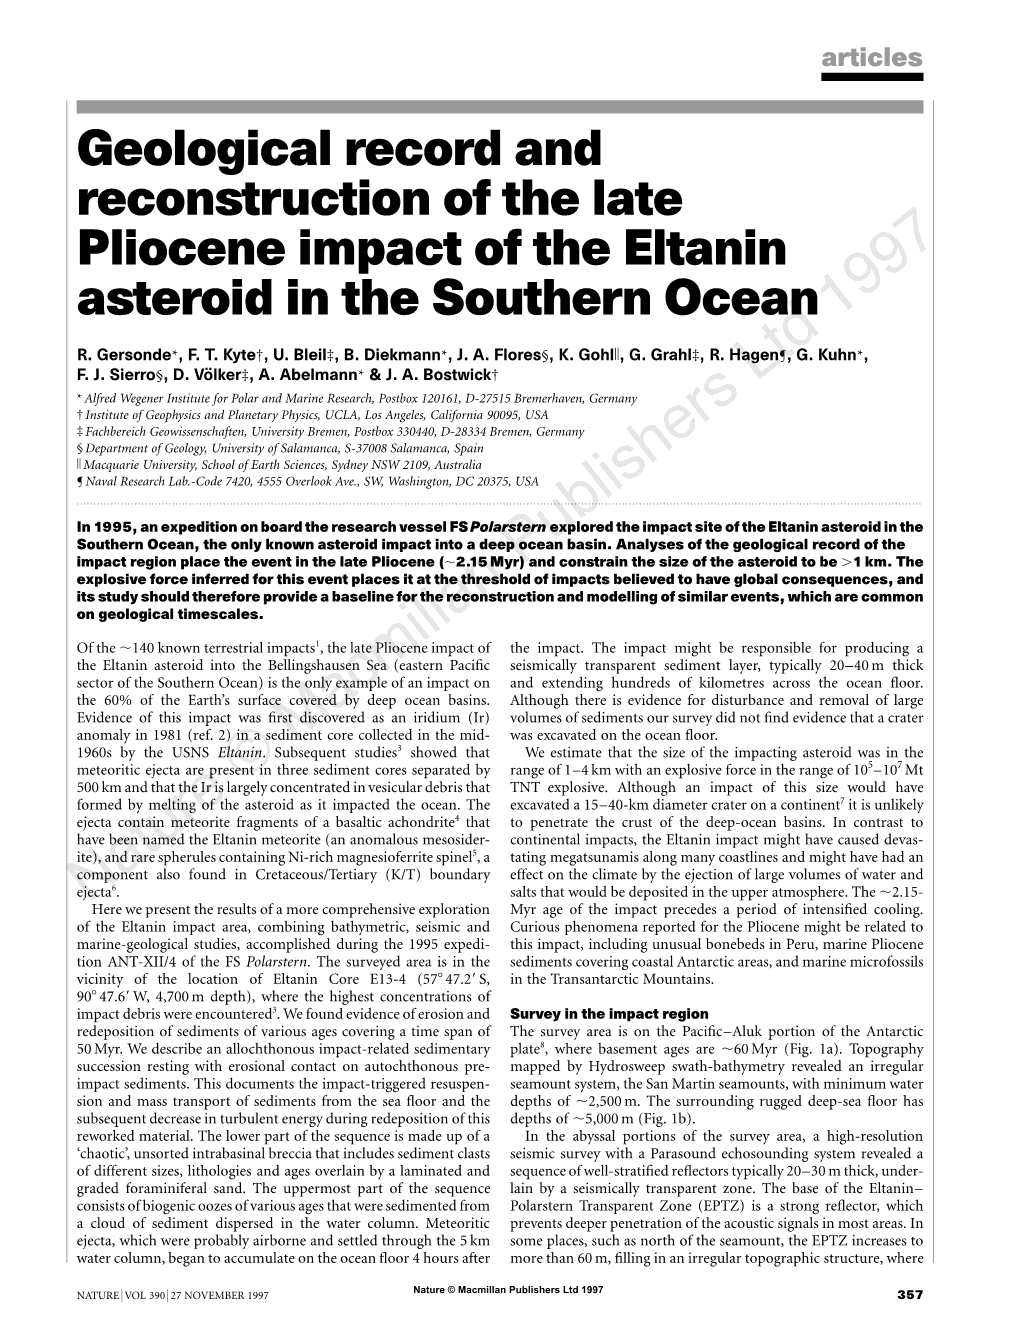 Geological Record and Reconstruction of the Late Pliocene Impact of the Eltanin Asteroid in the Southern Ocean